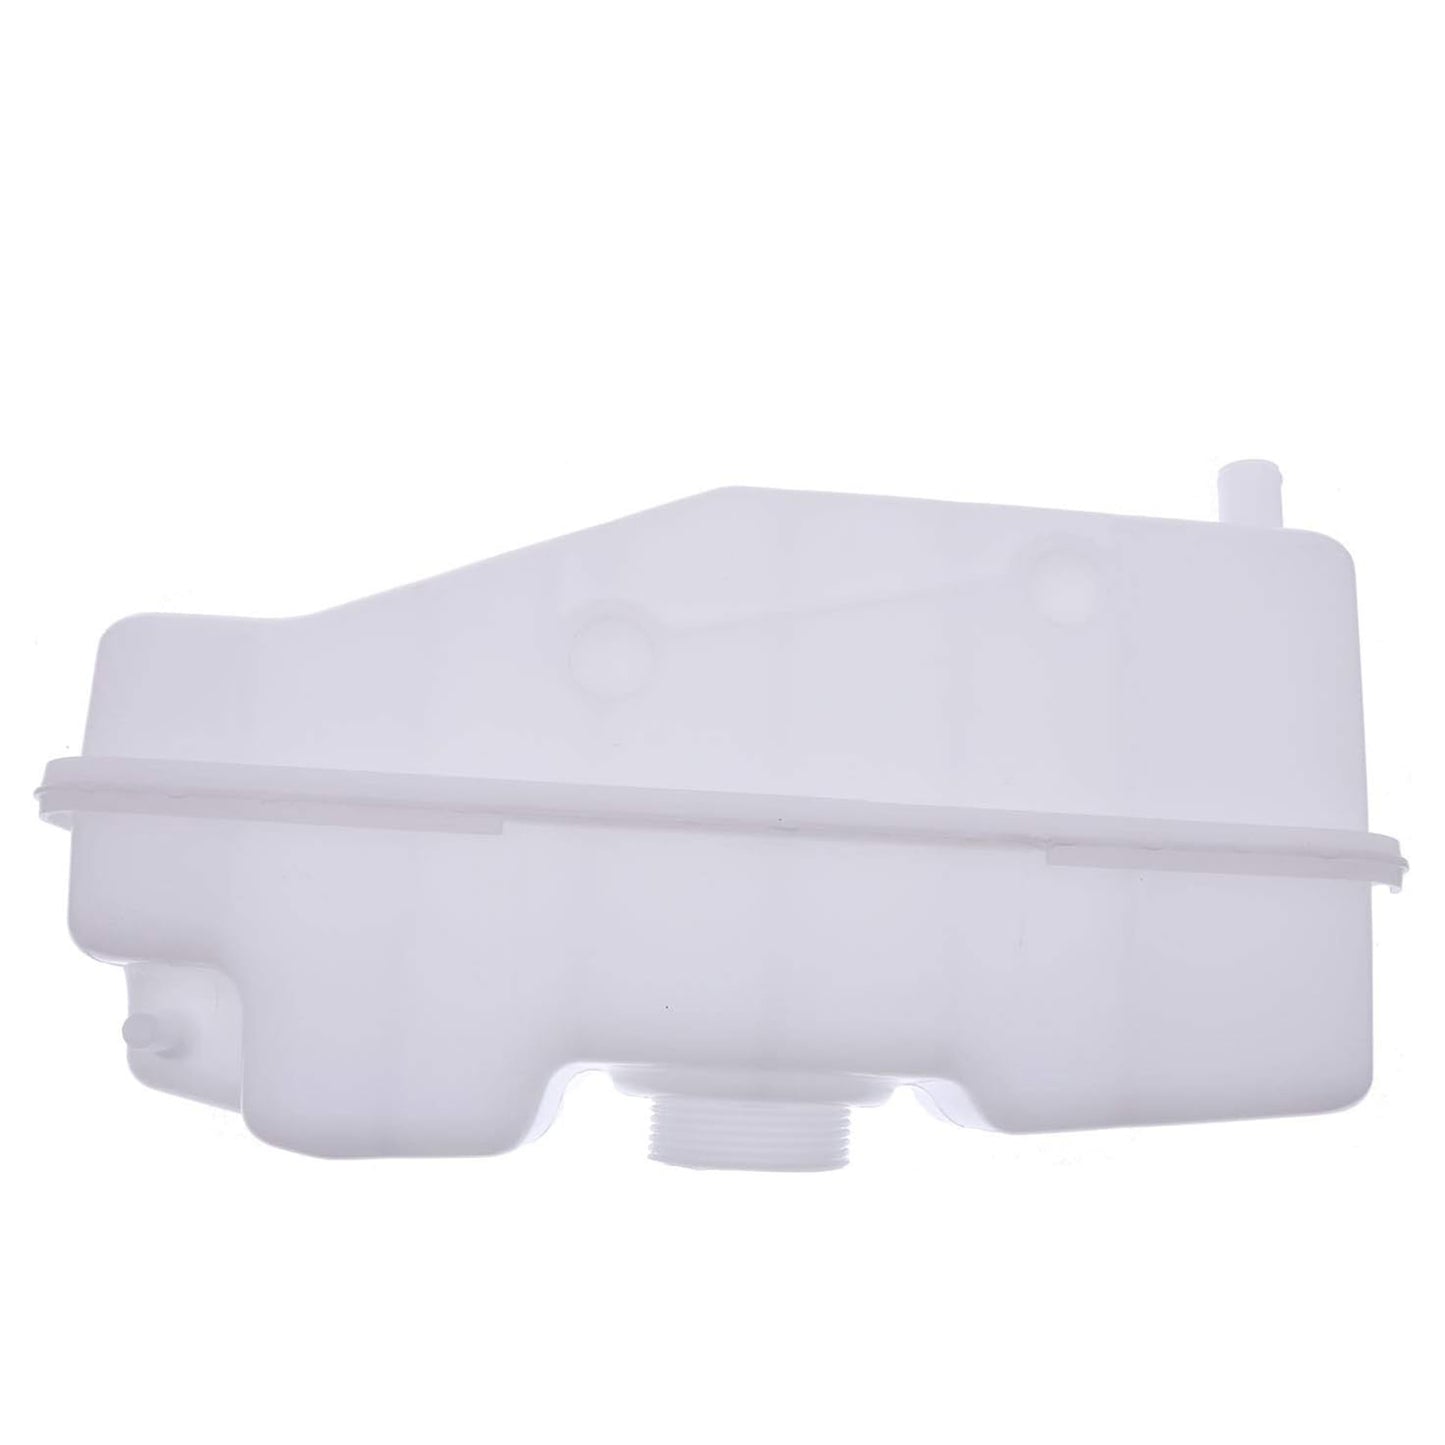 7220028 Radiator Water Coolant Reservoir Tank Compatible with Bobcat S510 S530 S550 S570